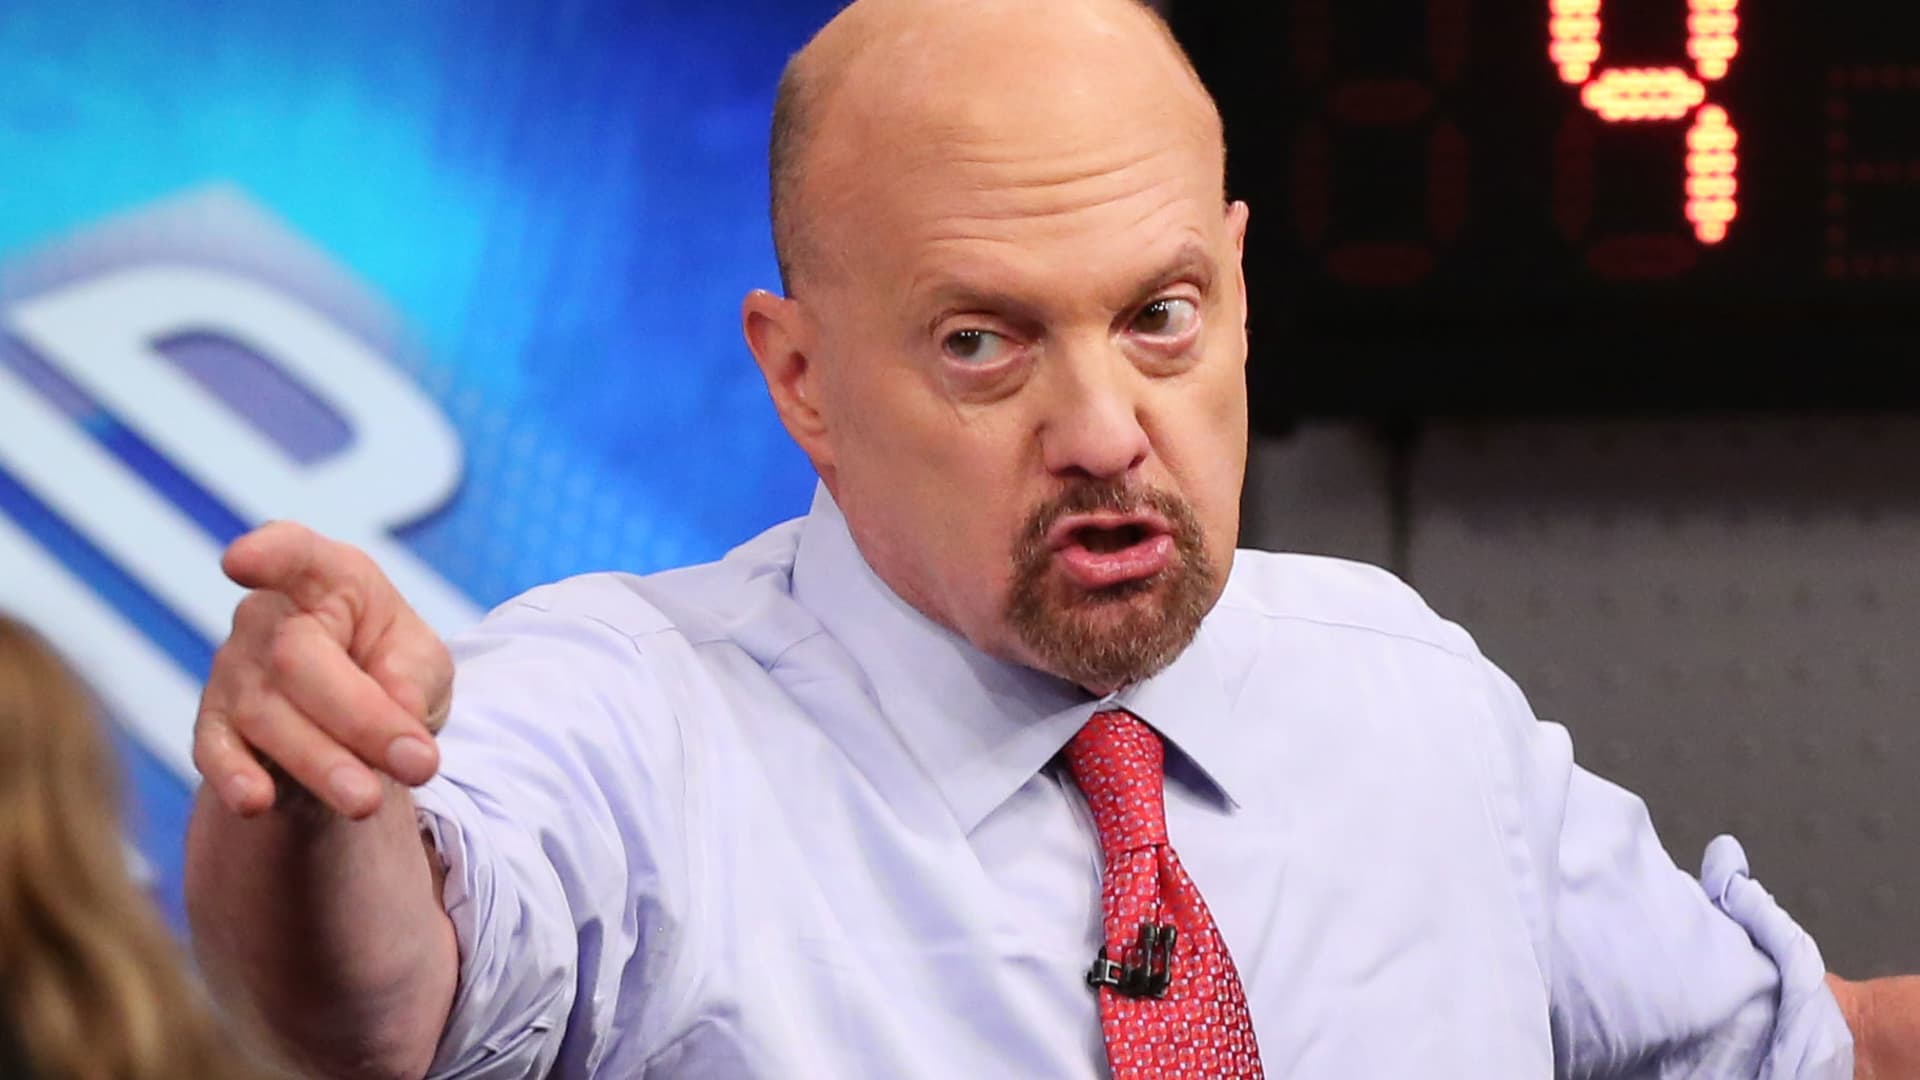 Charts suggest its time to buy the dips in oil, Jim Cramer says